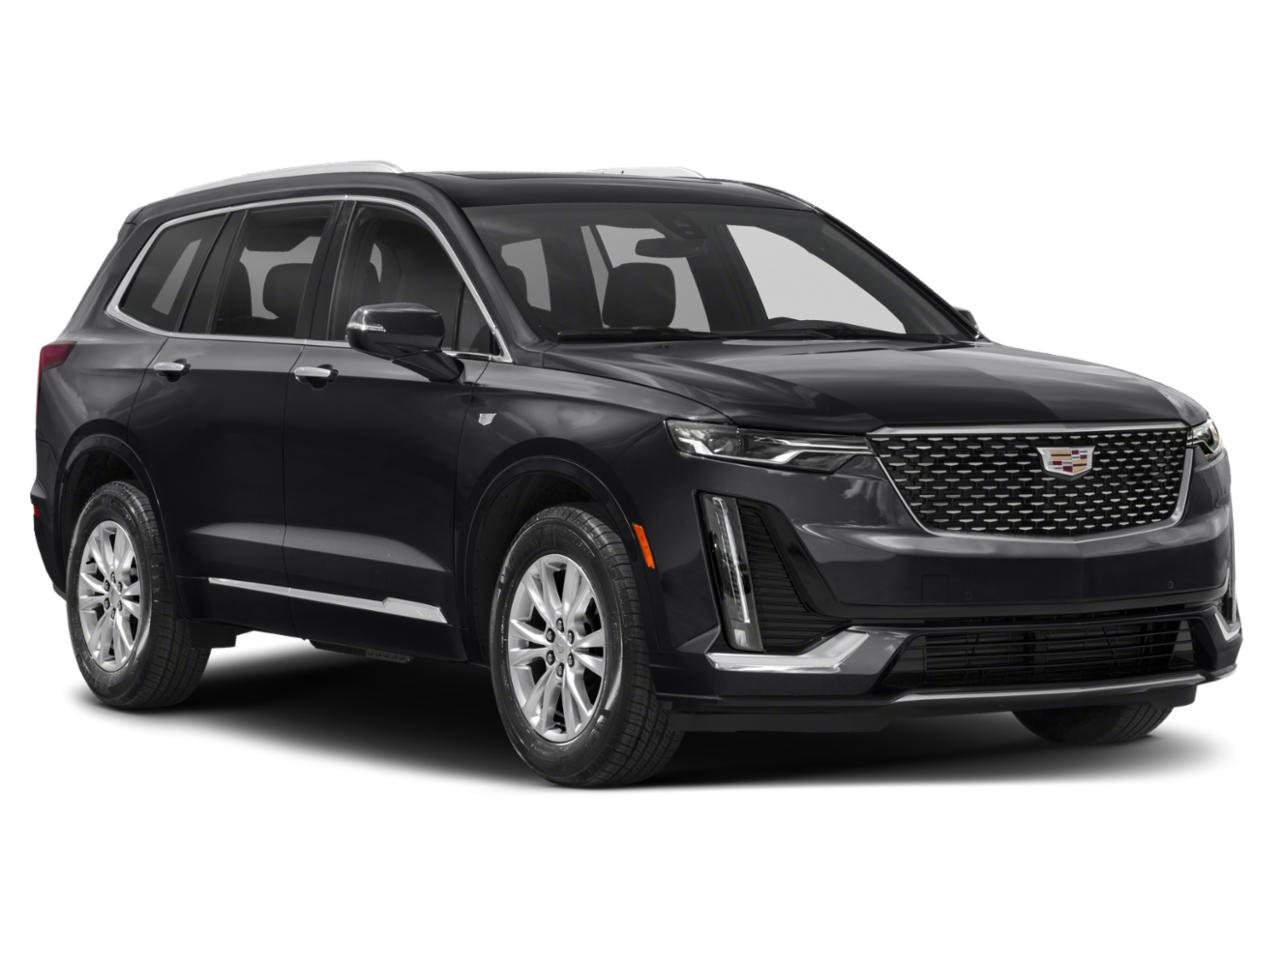 New 2024 Black Cadillac AWD Premium Luxury XT6 for Sale South of